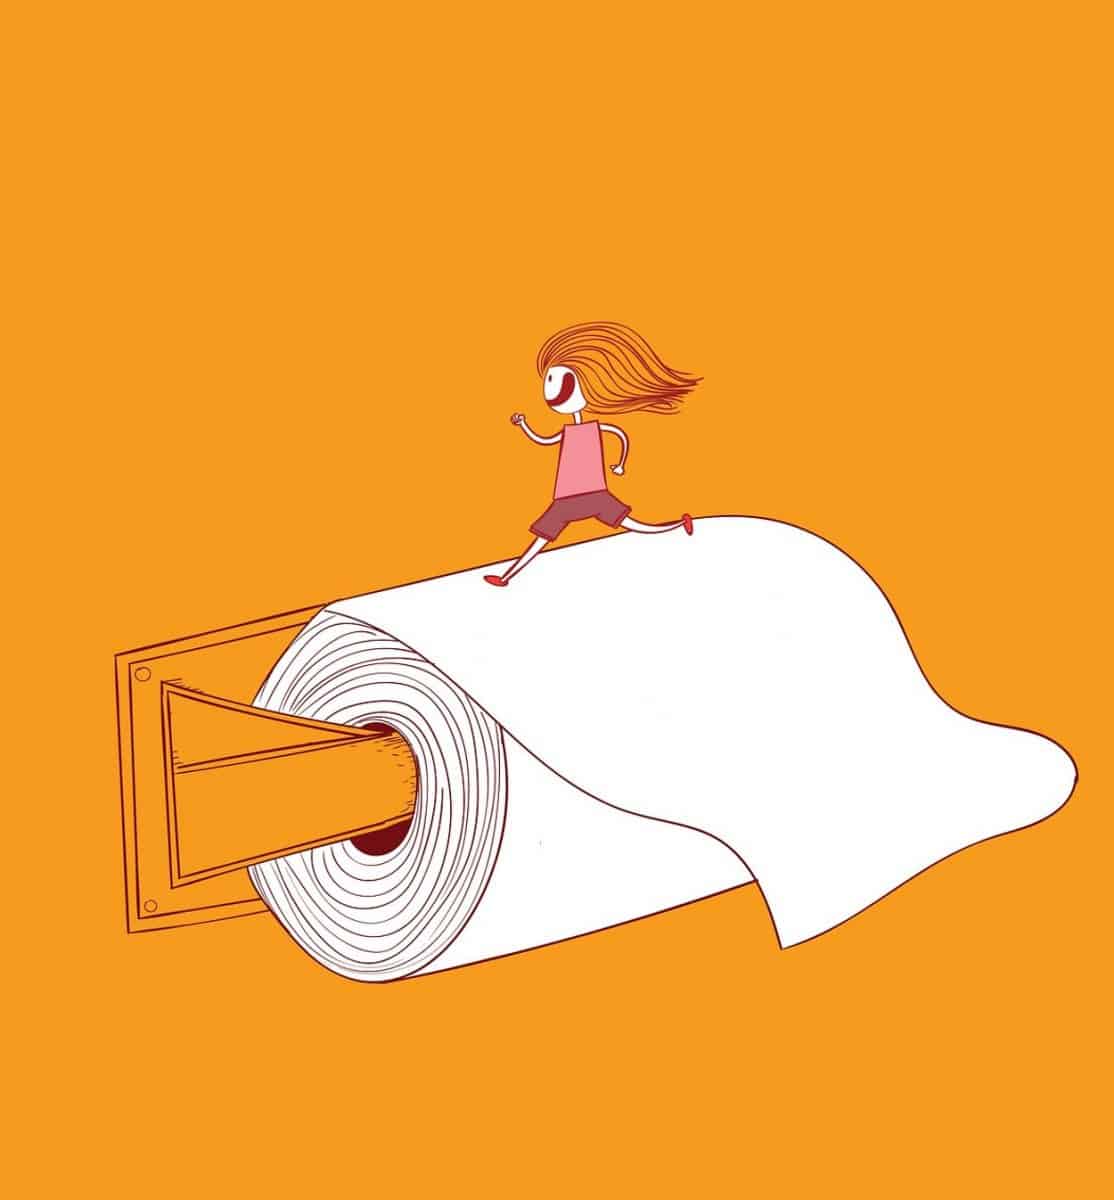 An anime girl is running on the toilet tissue.